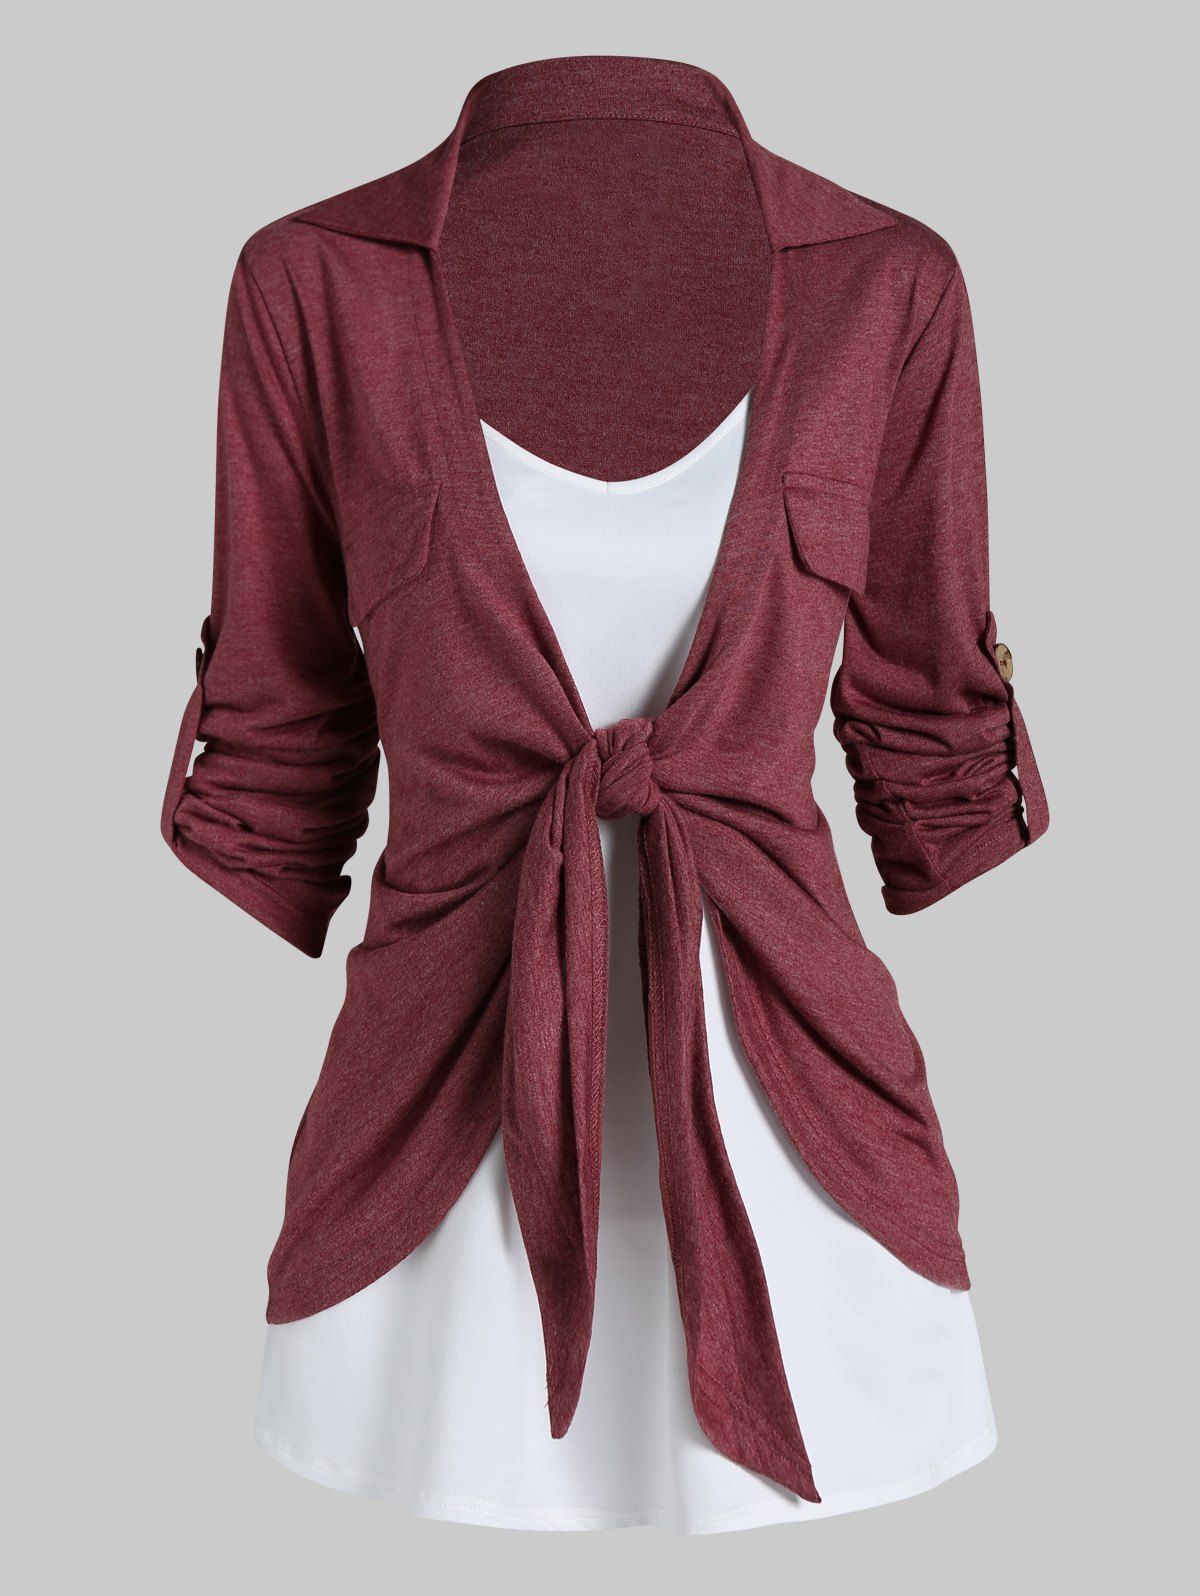 Asymmetric Roll Up Sleeve Mock Pocket Heathered Knot Top And Basic Camisole Contrast Two Piece Set - DEEP RED XXXL